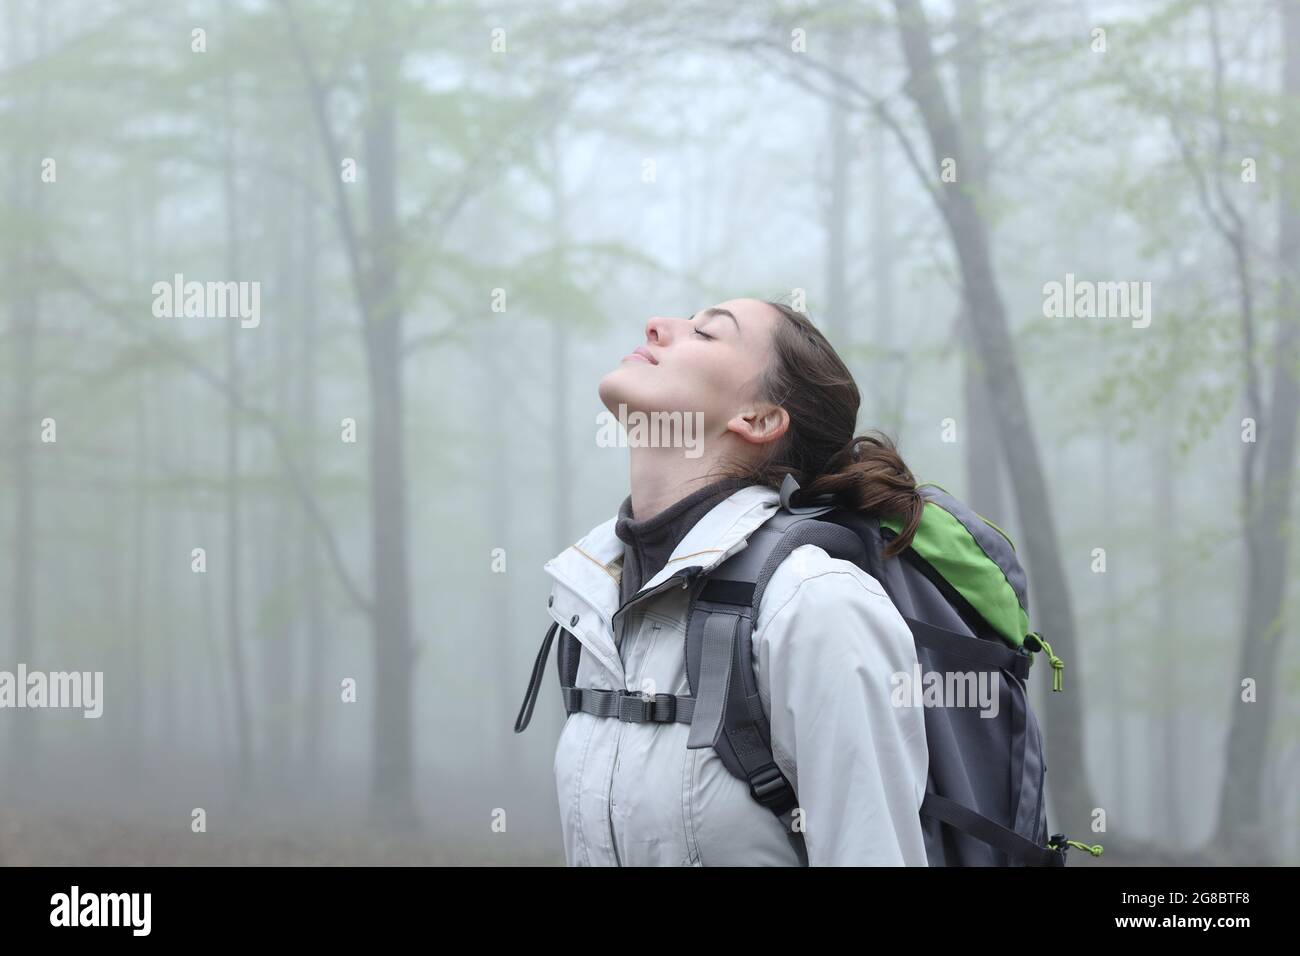 Side view portrait of a trekker breathing fresh air in nature a foggy day Stock Photo